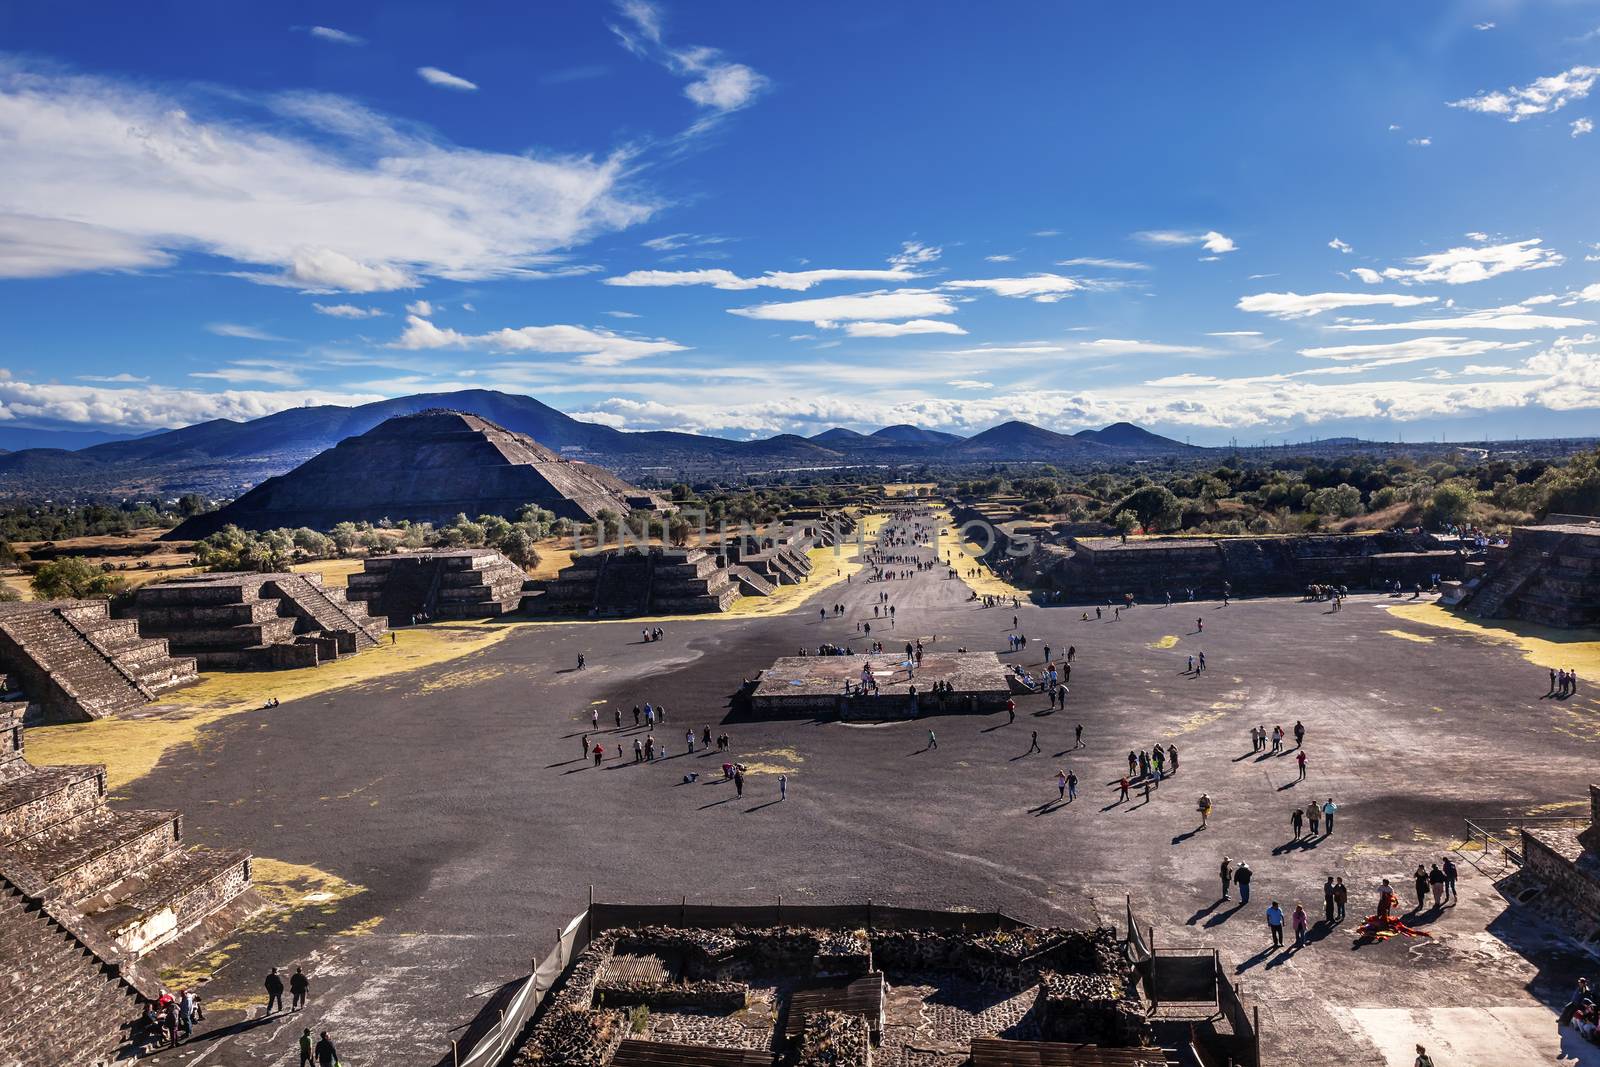 Avenue of Dead and Sun Pyramid, Teotihuacan, Mexico